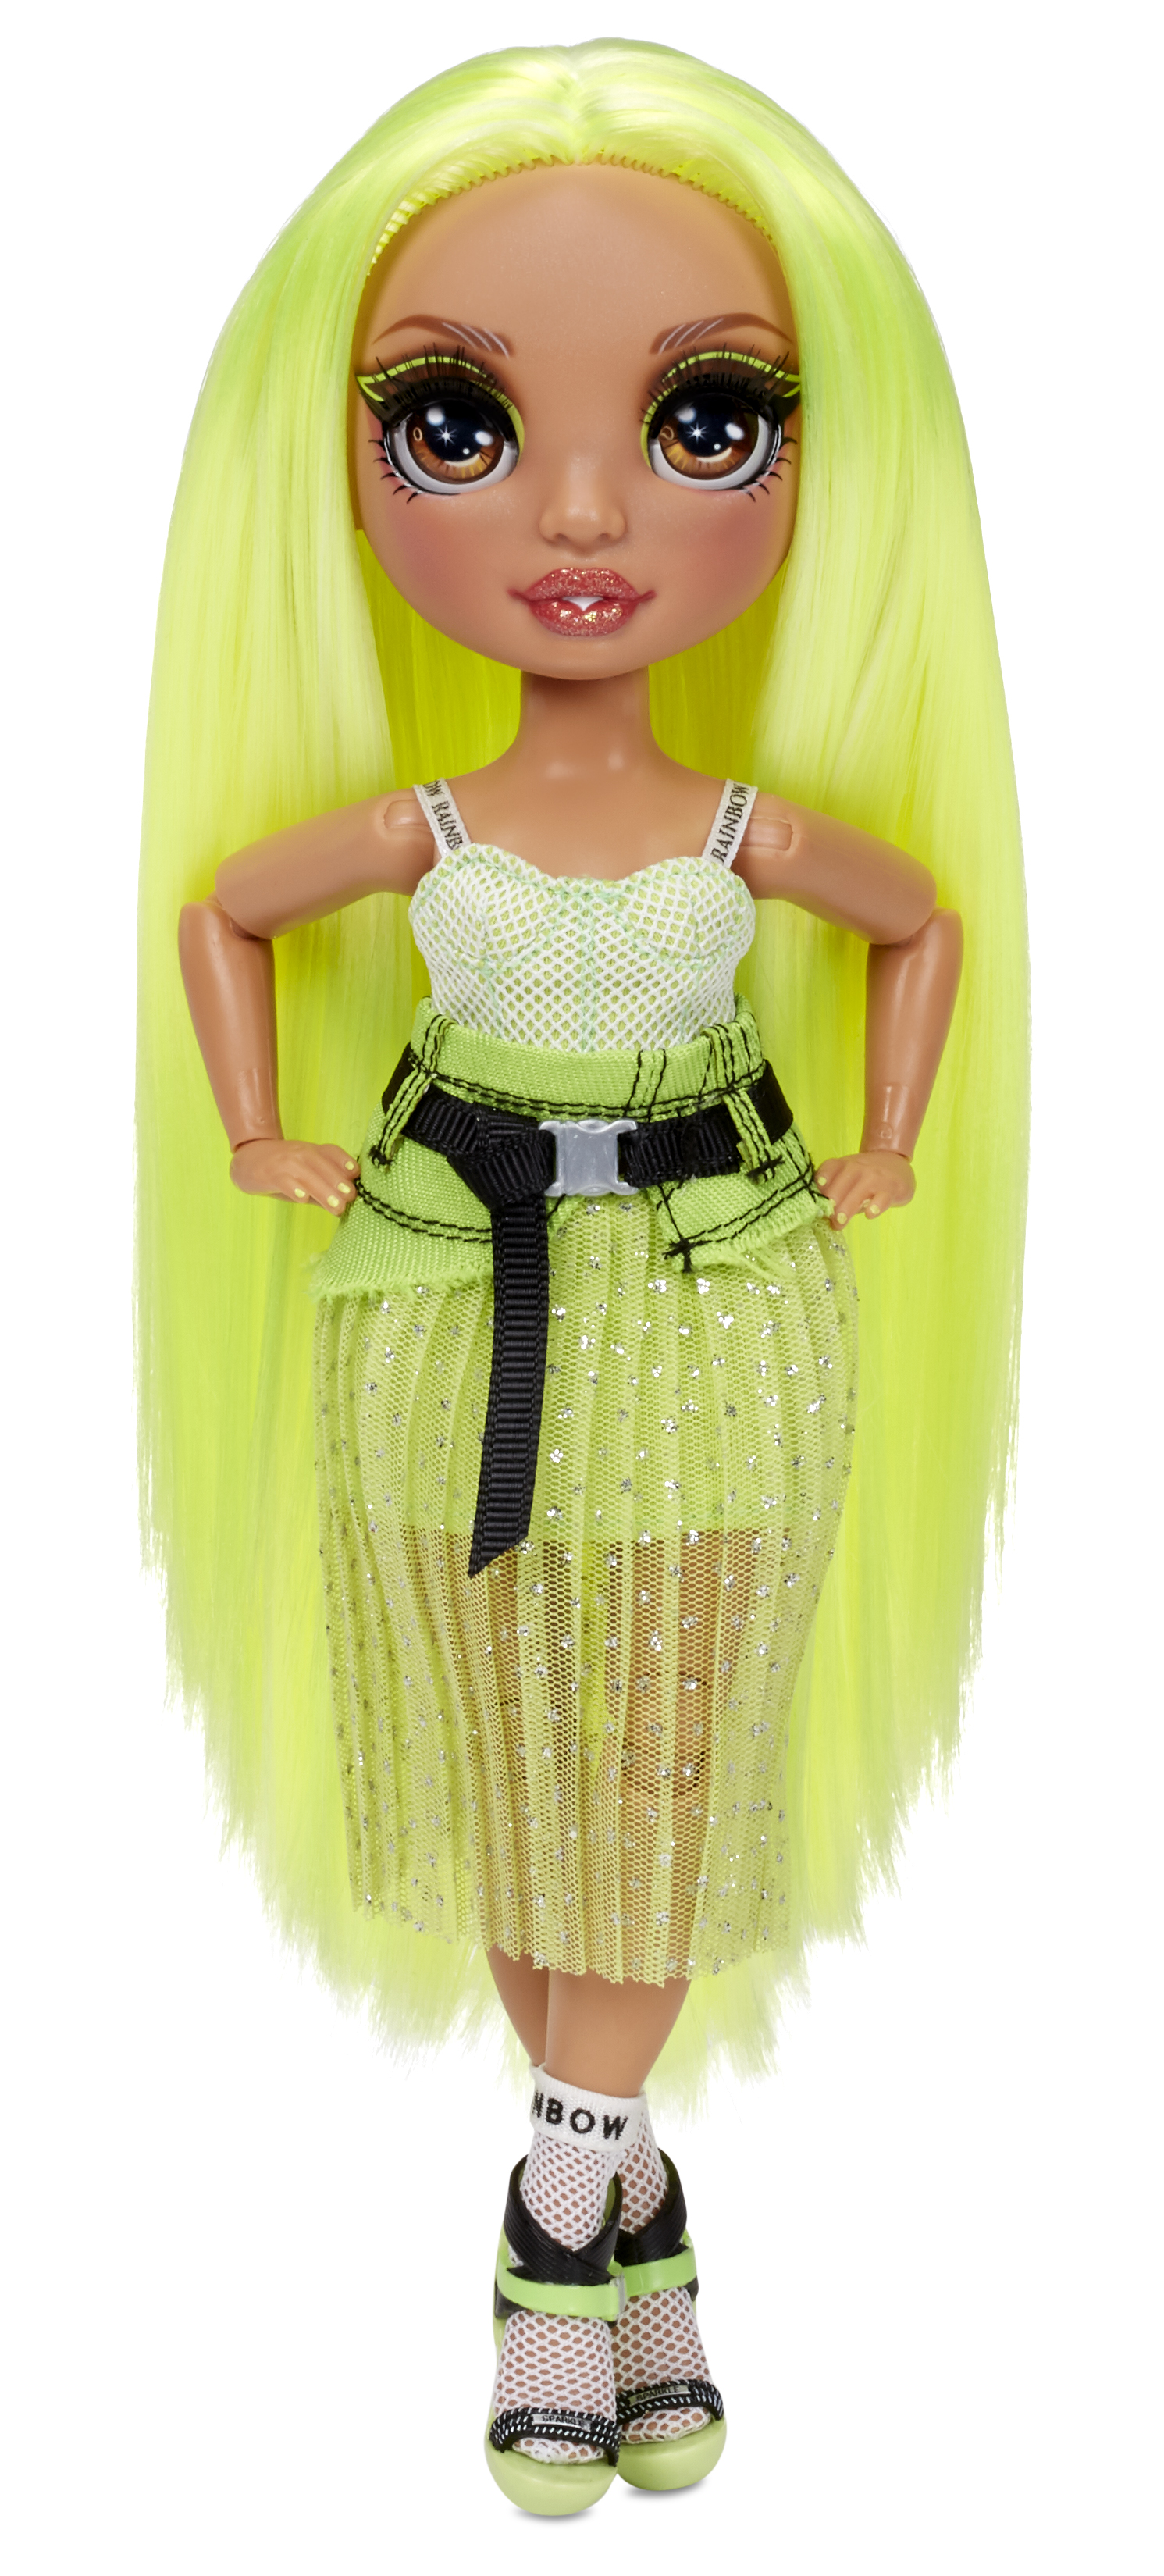 Rainbow High Karma Nichols – Neon Green Fashion Doll with 2 Complete Mix & Match Outfits and Accessories, Toys for Kids 6-12 Years Old - image 1 of 9